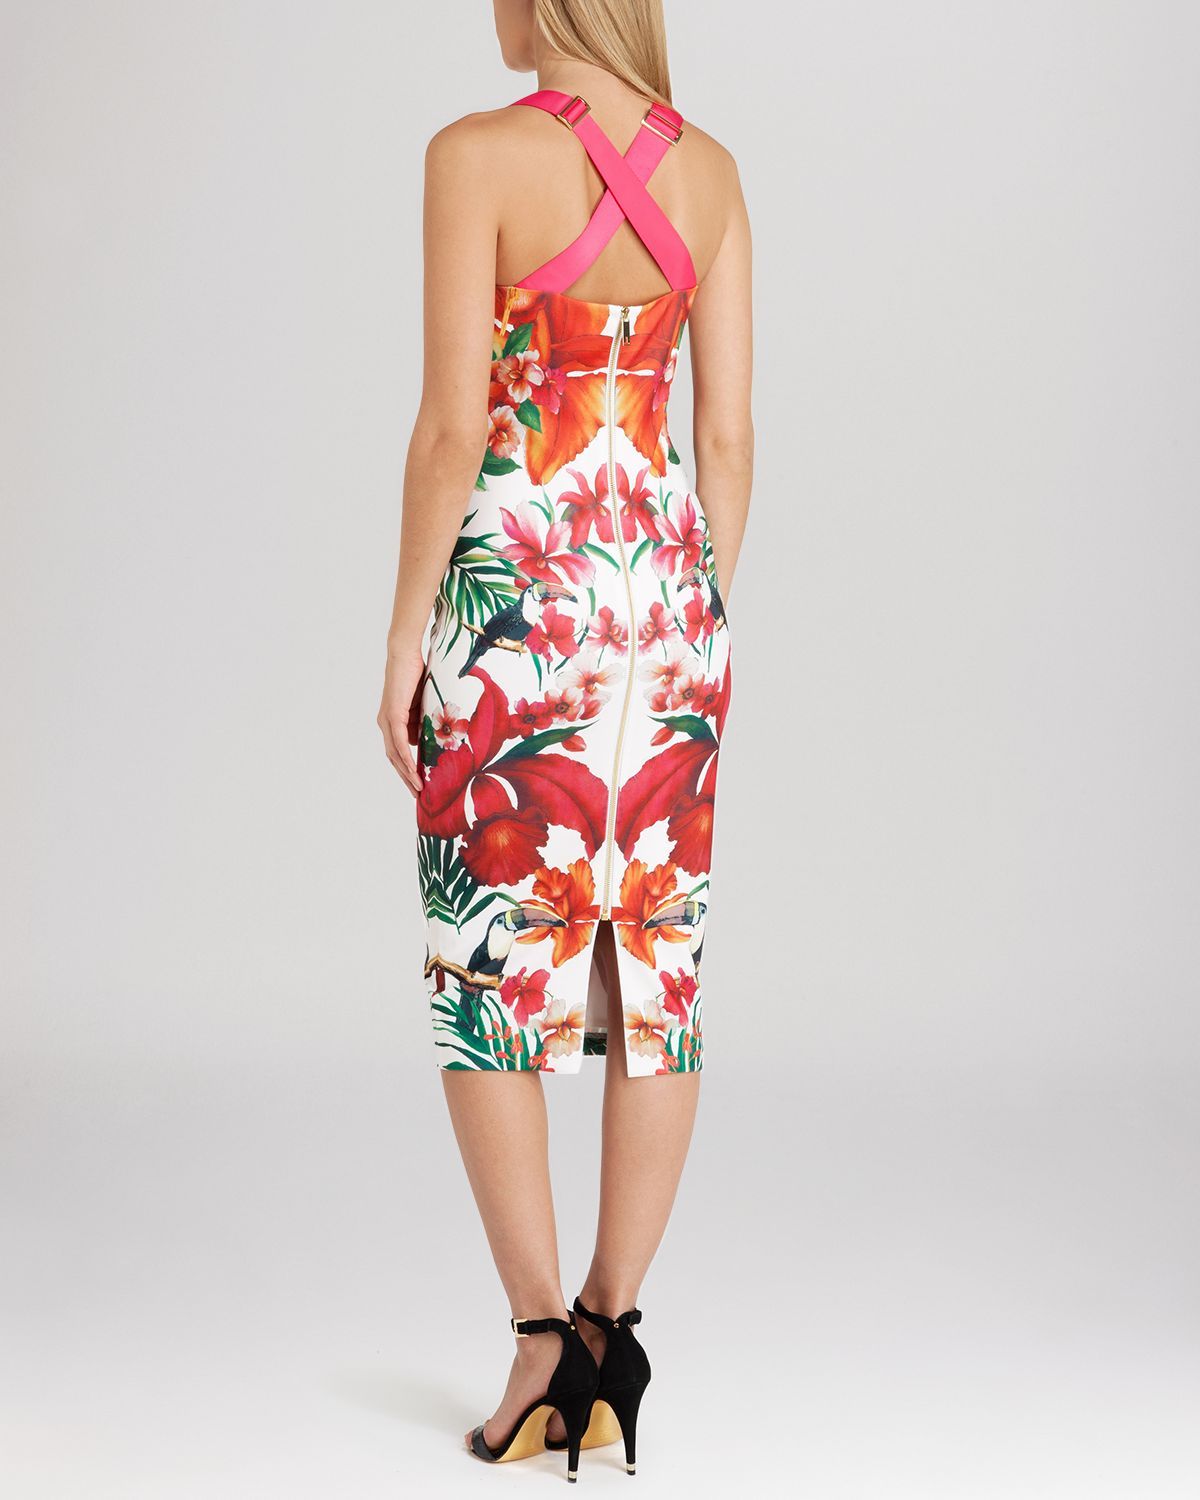 Ted baker Dress - Jameela Tropical Toucan Floral Sheath in Red | Lyst1200 x 1500